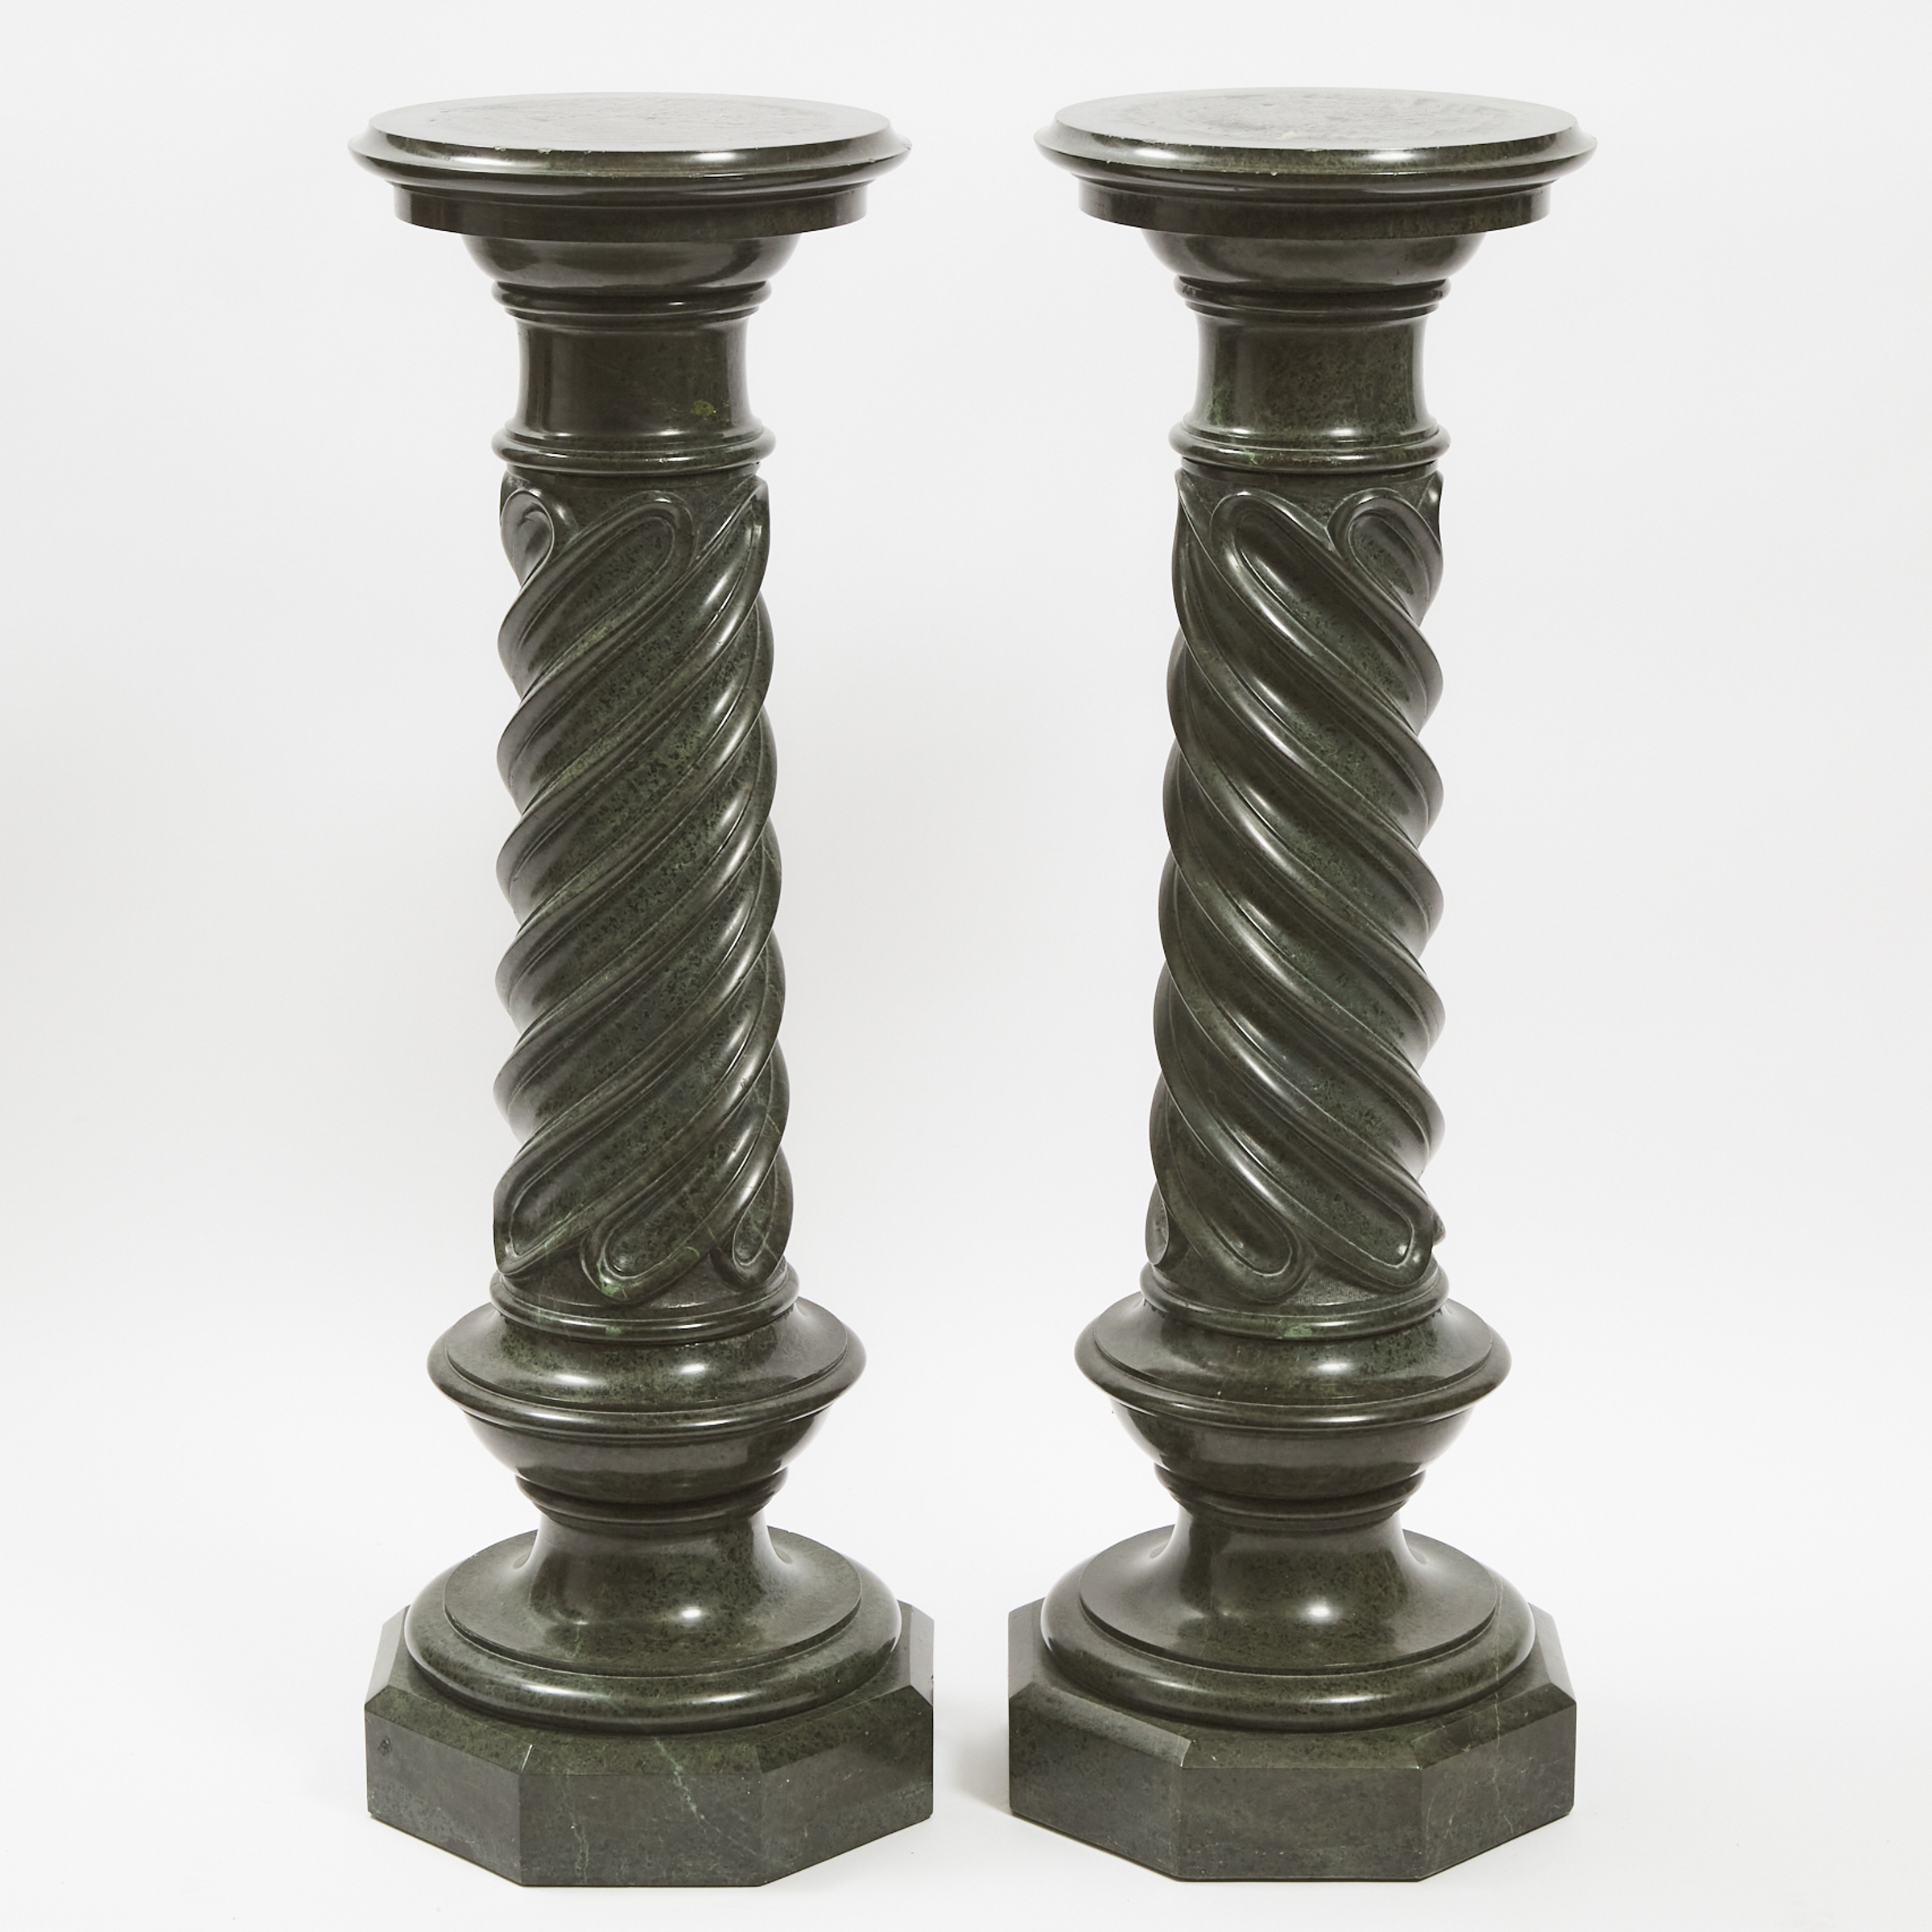 Large and Impressive Pair of Verde Antico Column Form Pedestals, early 20th century